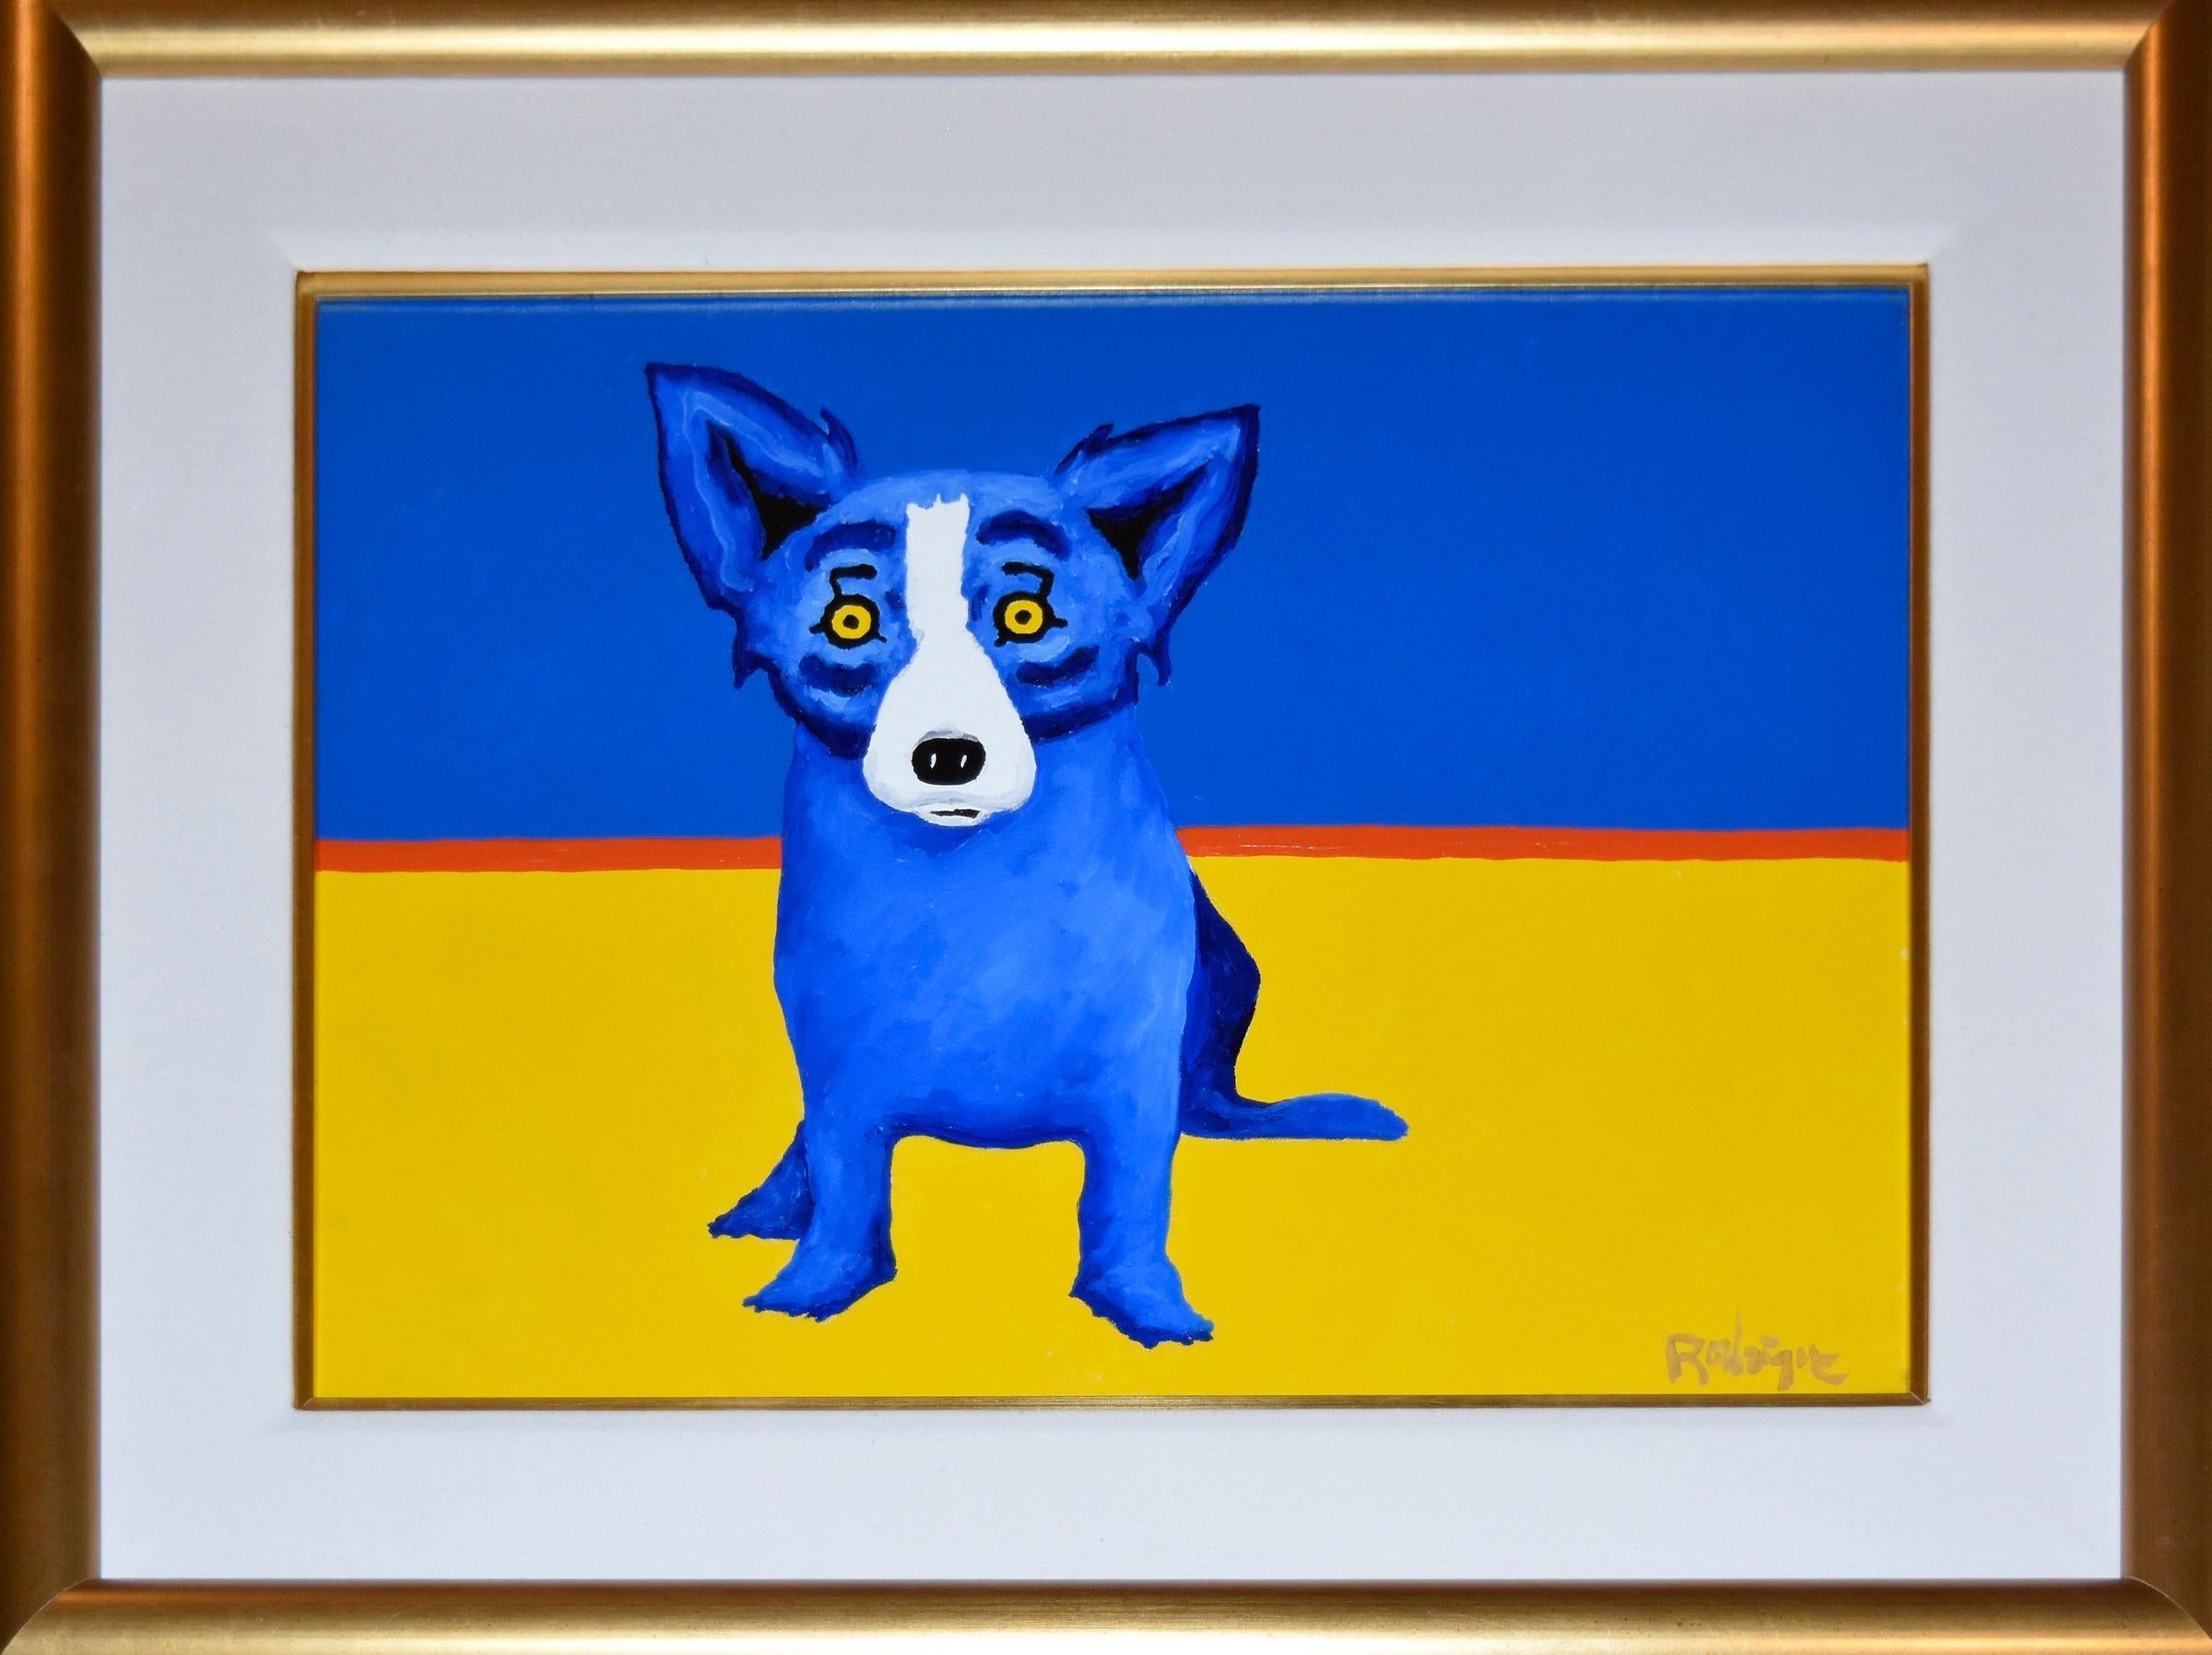 George Rodrigue Animal Painting - Original - There's a Fine Line Between Blue and Yellow - Signed Oil on Linen